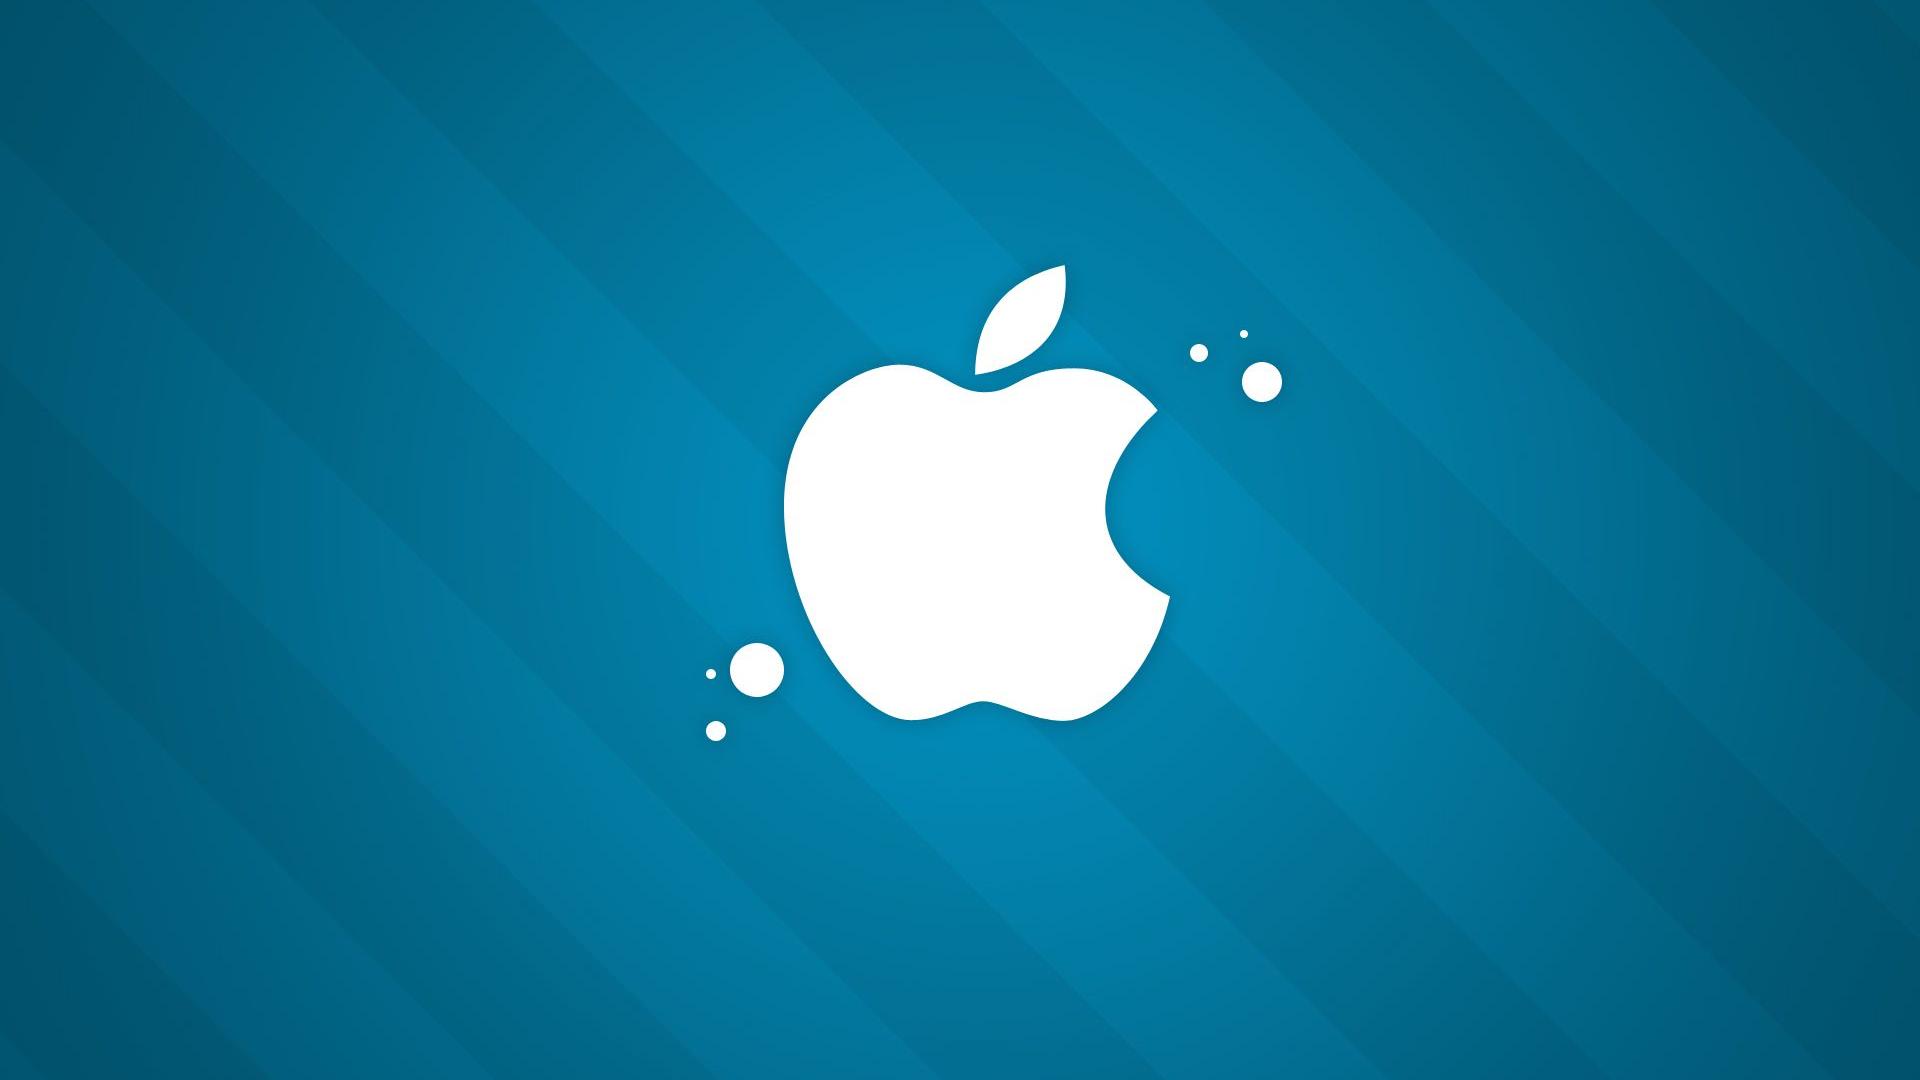 Hd Apple Logo Wallpaper and Background